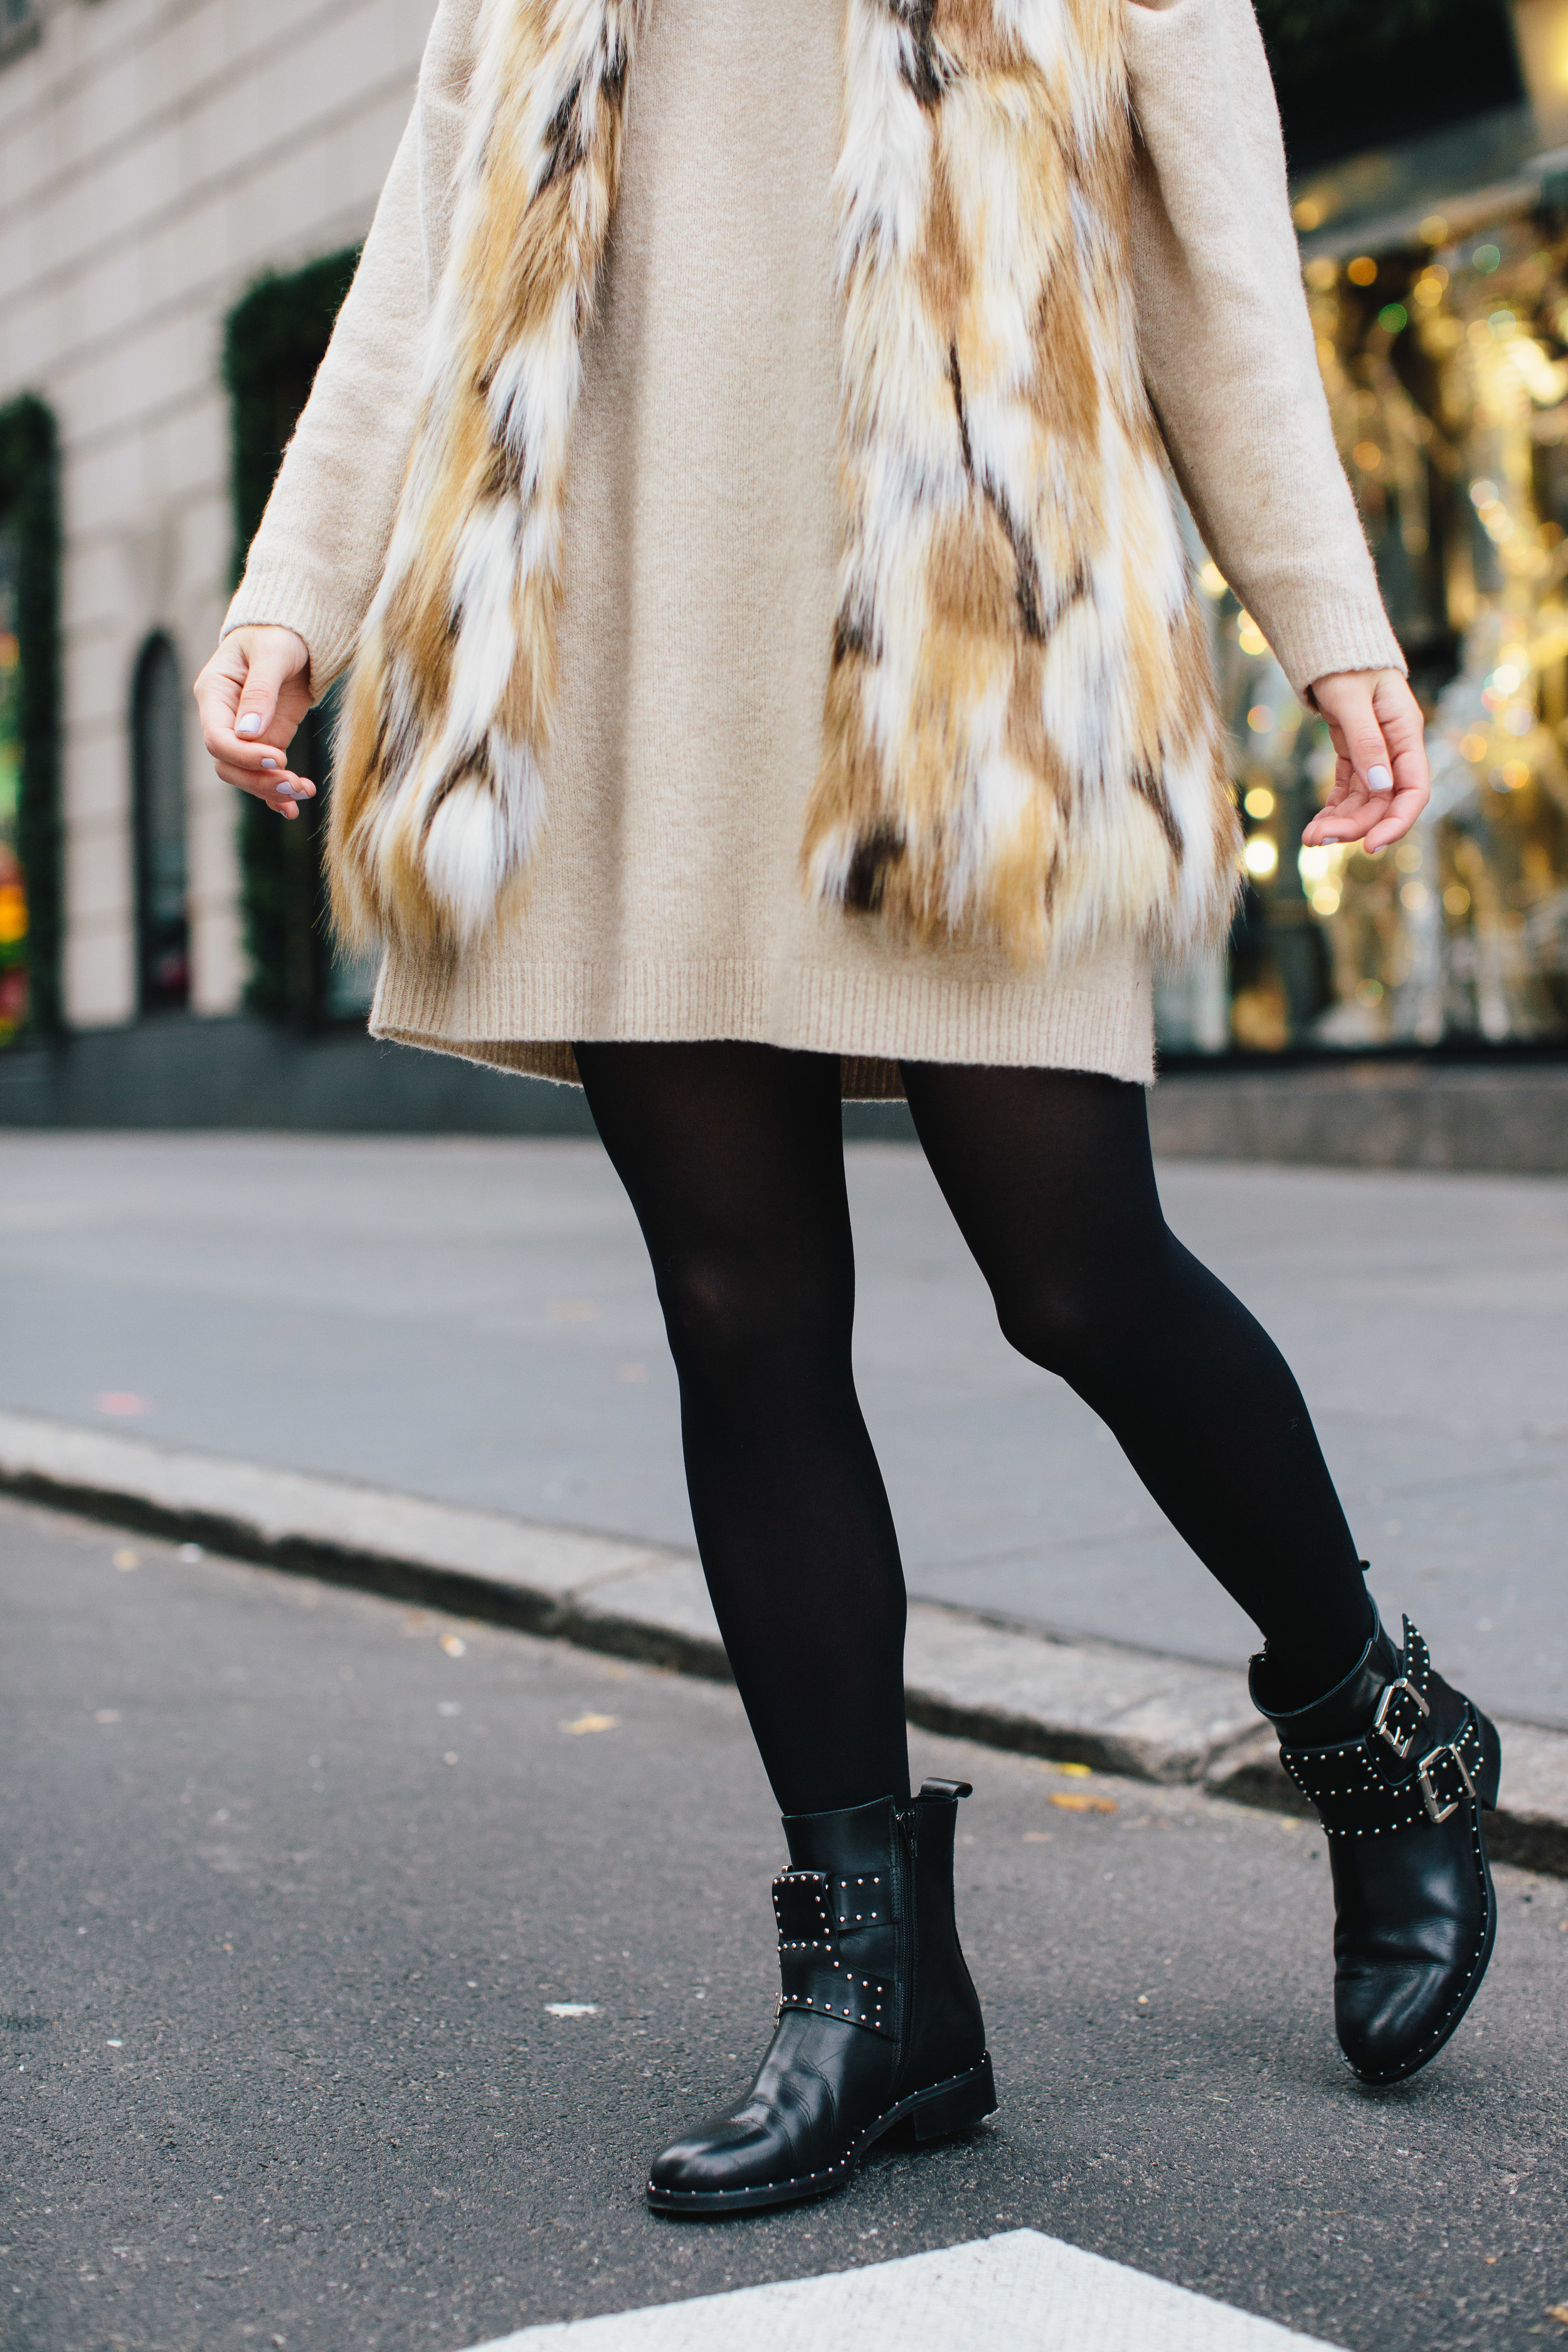 Calico Fur Vest Black Buckle Booties 5 Bad Habits To Ditch In The New Year Esther Santer Fashion Blog NYC Street Style Blogger Outfit OOTD Trendy DSW Shoes Women Girl Holiday Season Window Shopping New York City Tights Beige Sweater Dress  Winter Cozy.JPG